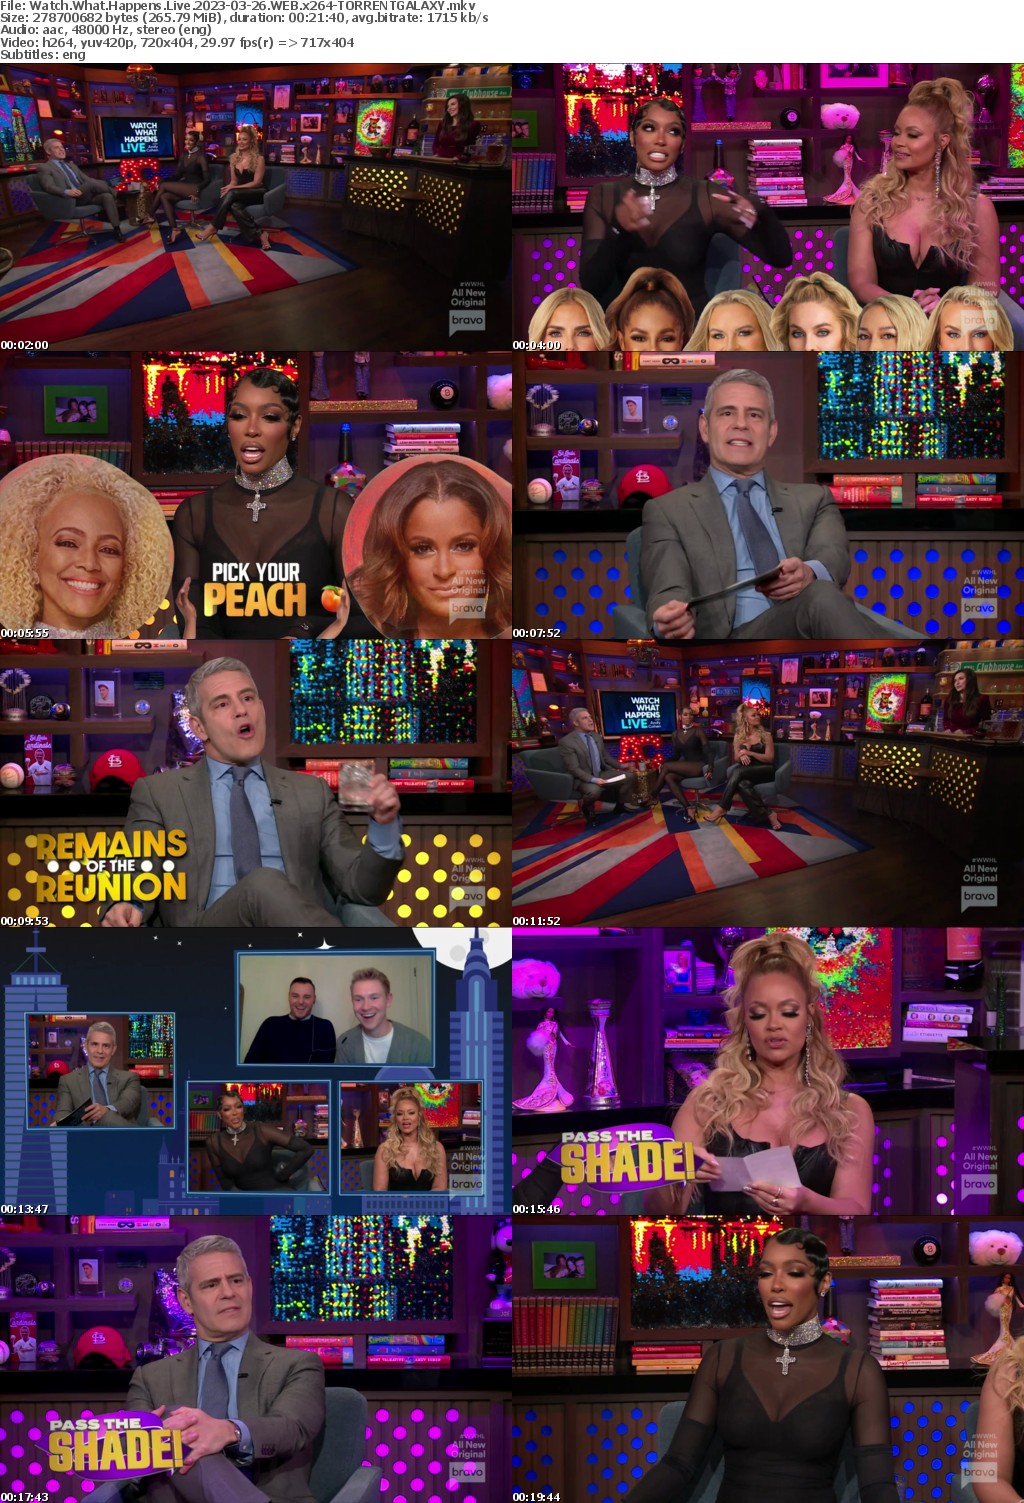 Watch What Happens Live 2023-03-26 WEB x264-GALAXY